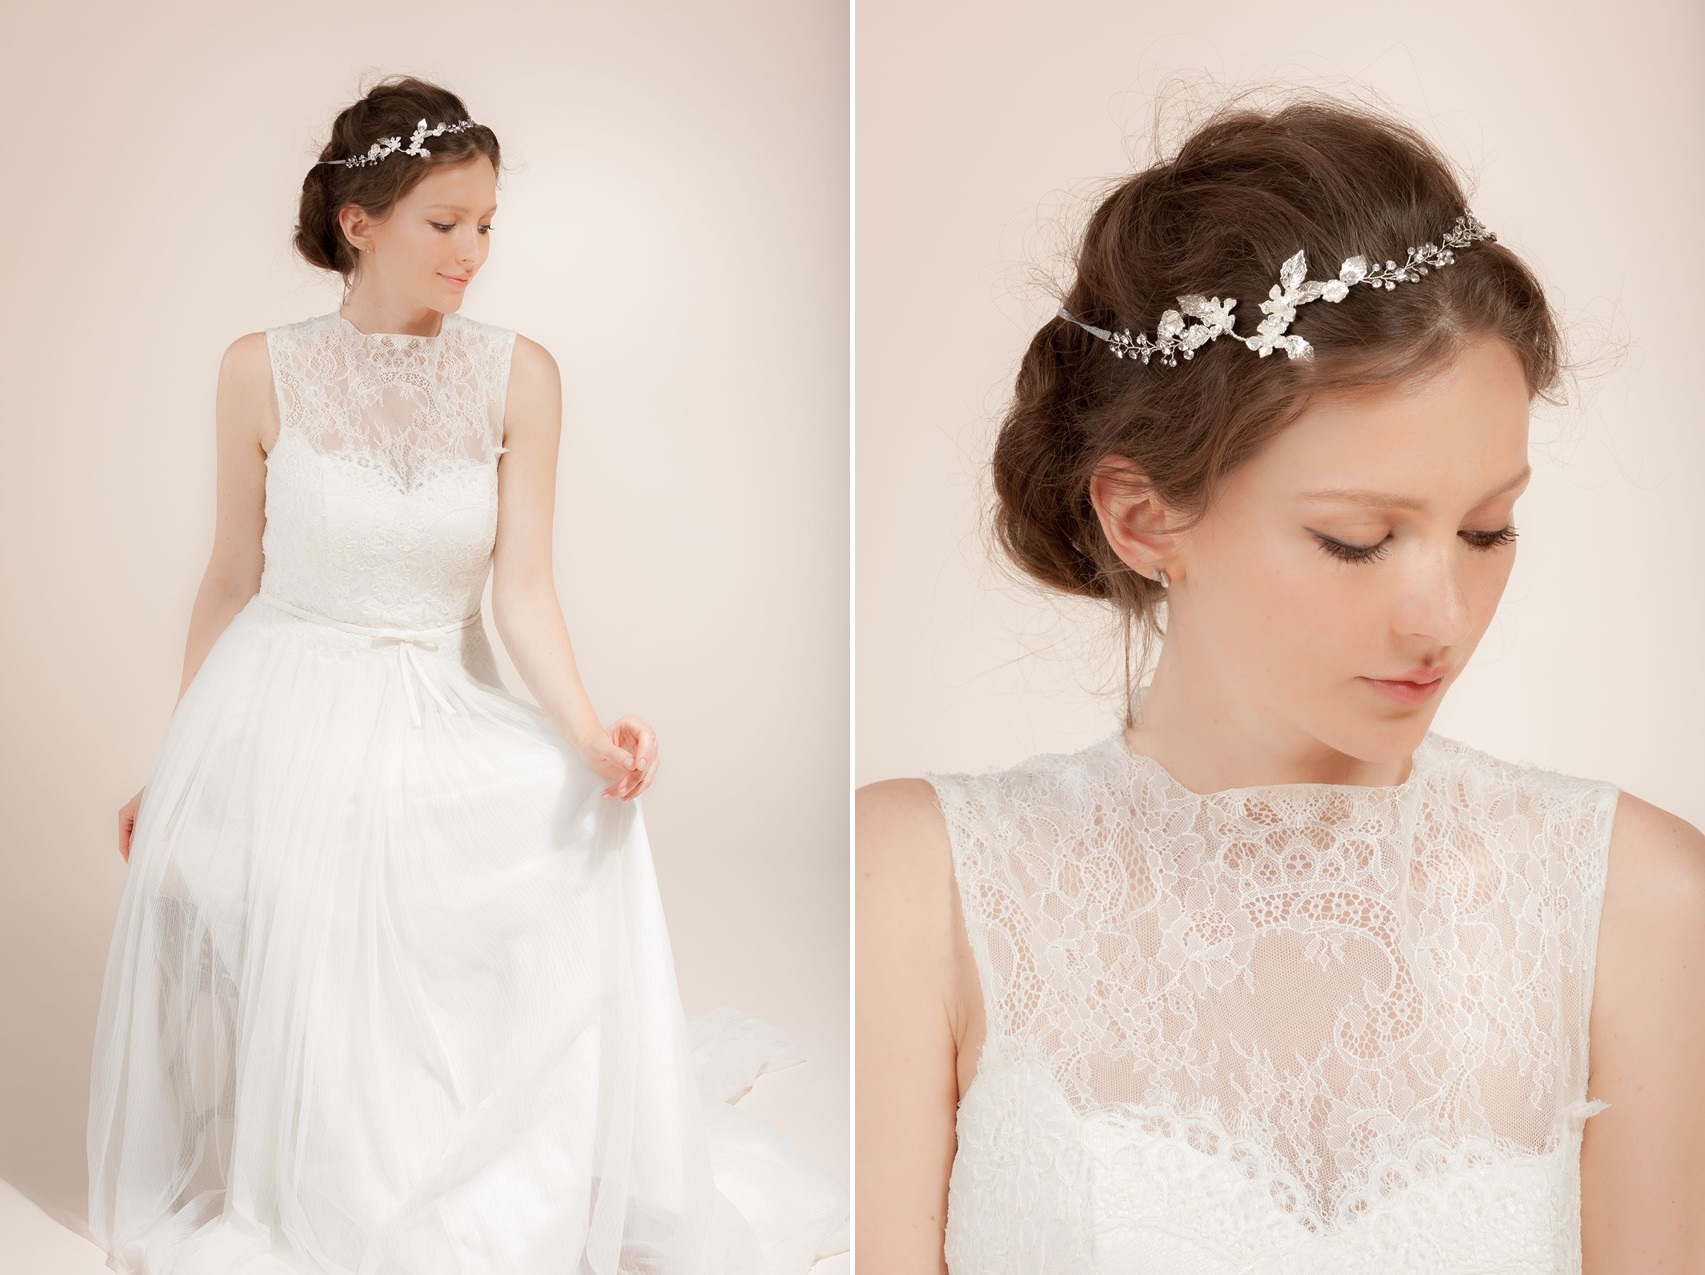 Silver Headband - A New Collection of Elegant Bridal Hair Accessories & Veils from Wanlu Bridal